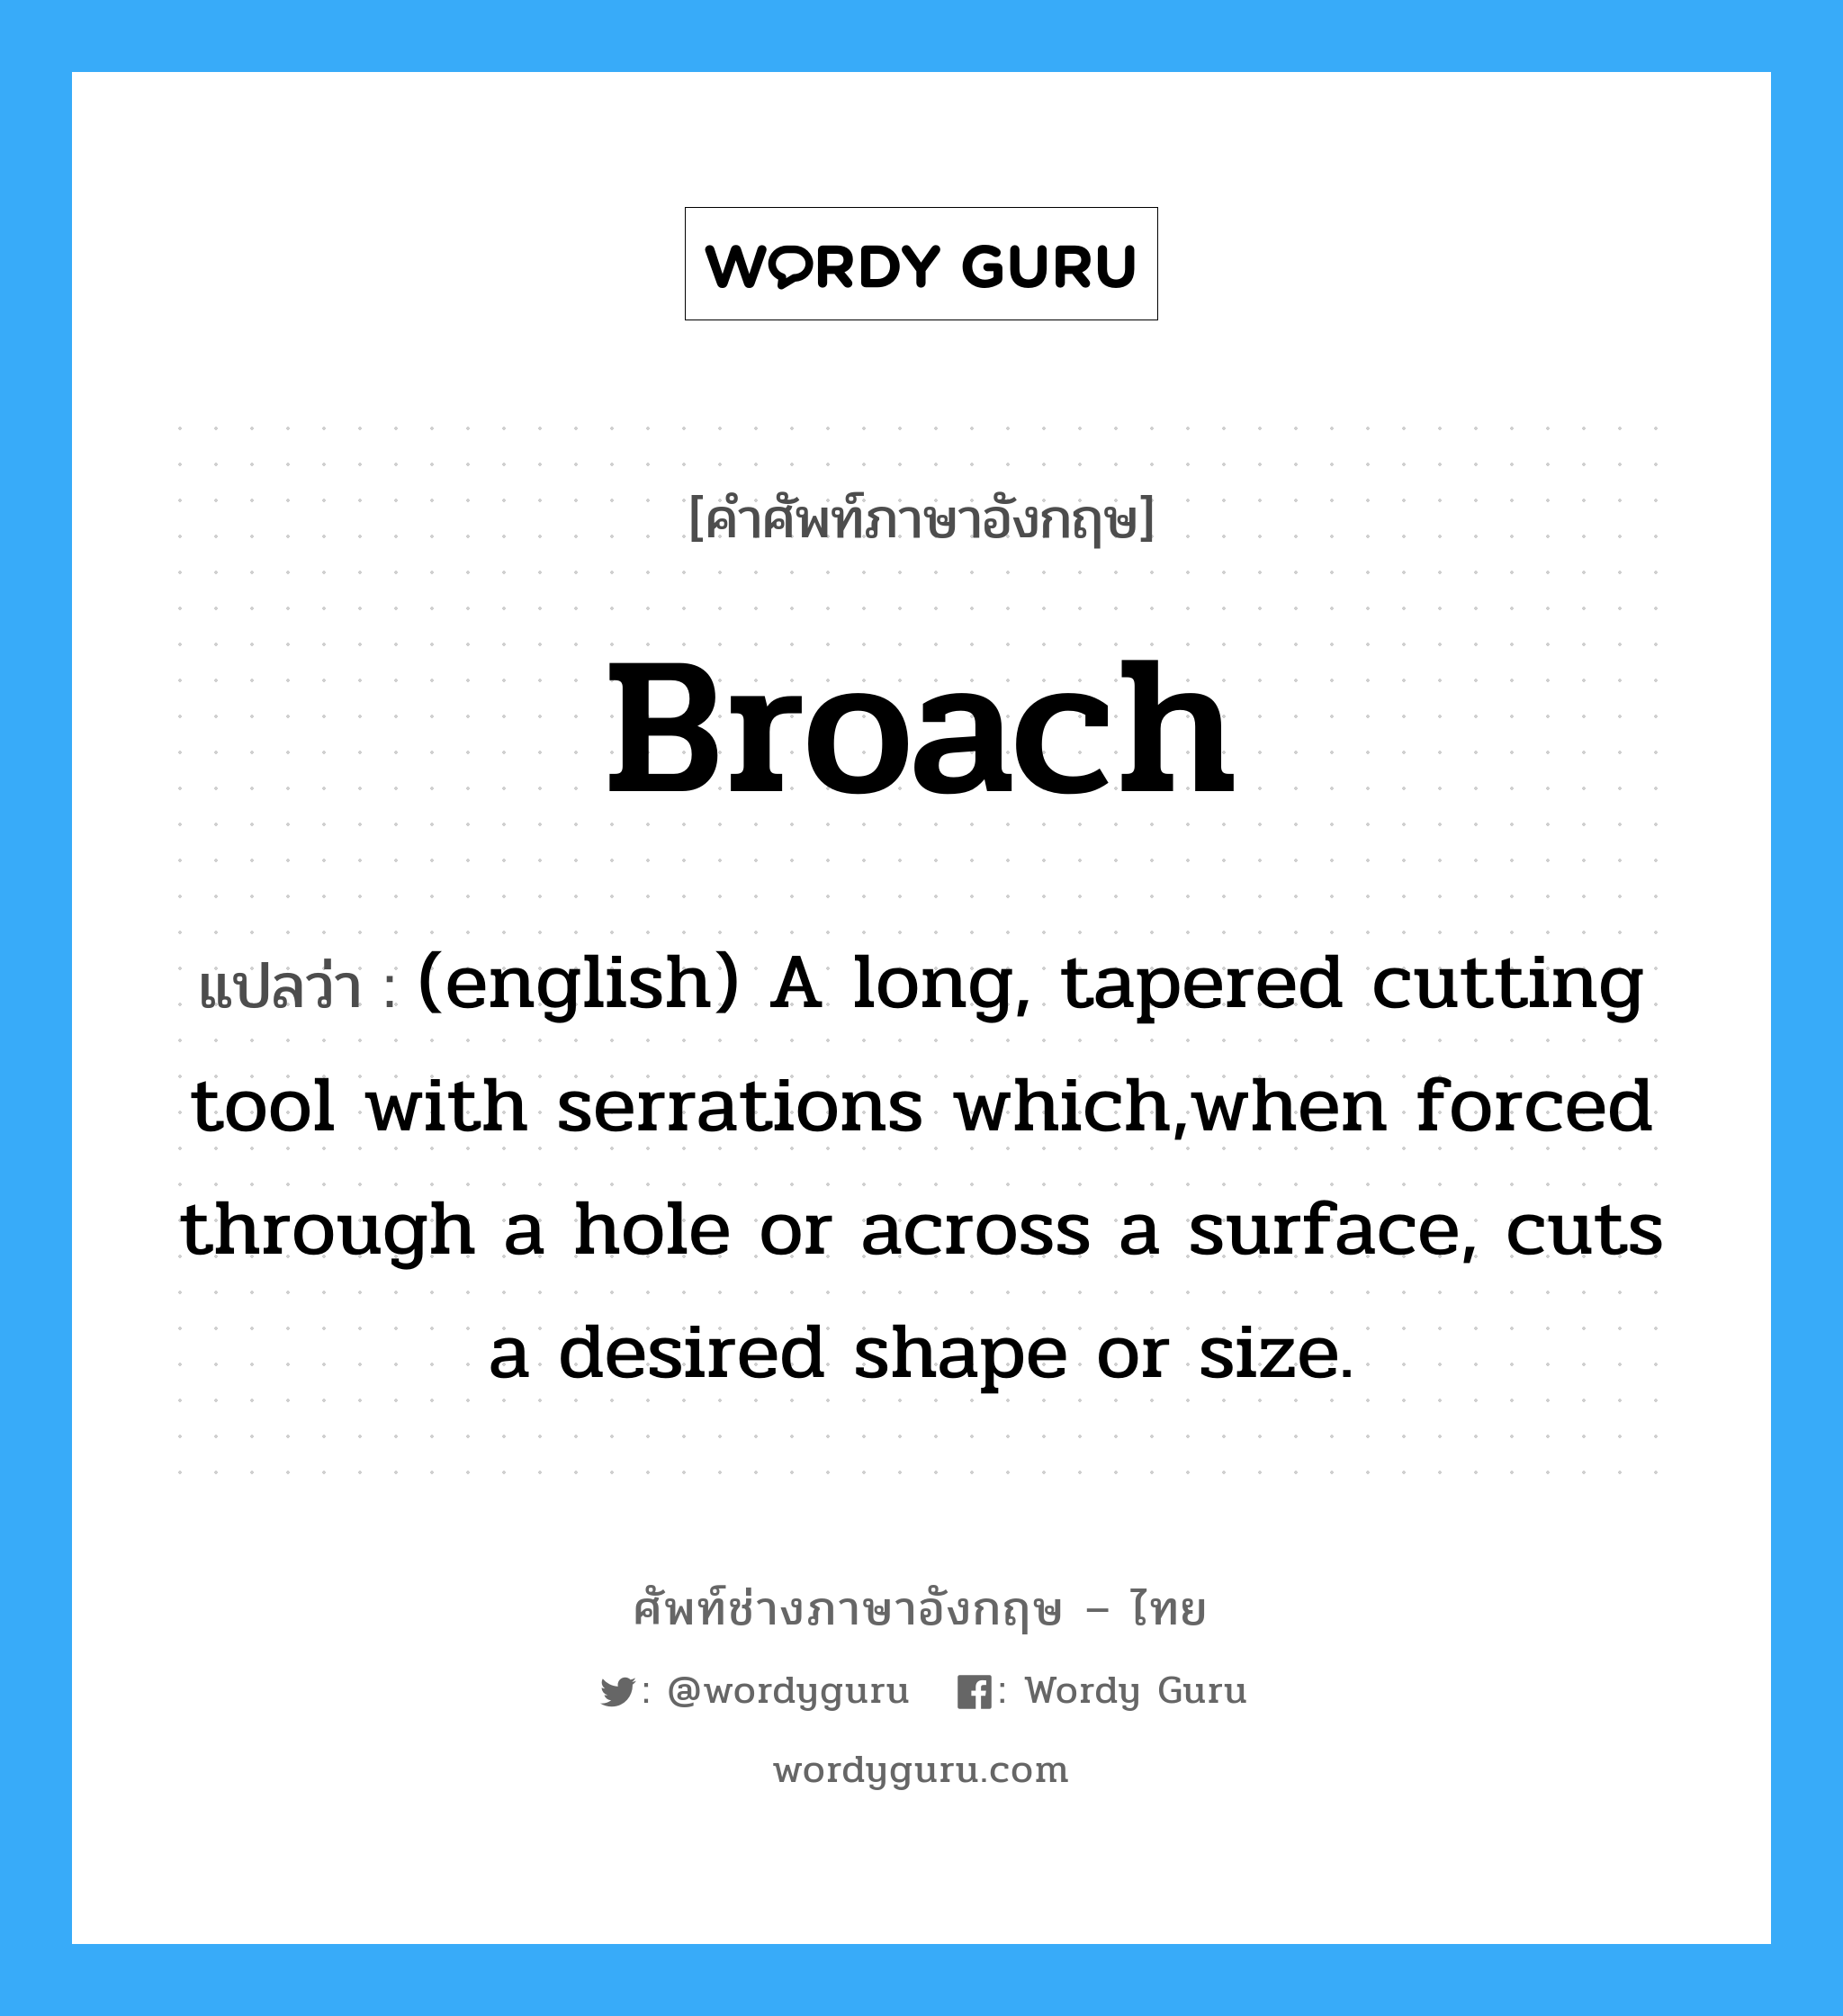 Broach แปลว่า?, คำศัพท์ช่างภาษาอังกฤษ - ไทย Broach คำศัพท์ภาษาอังกฤษ Broach แปลว่า (english) A long, tapered cutting tool with serrations which,when forced through a hole or across a surface, cuts a desired shape or size.